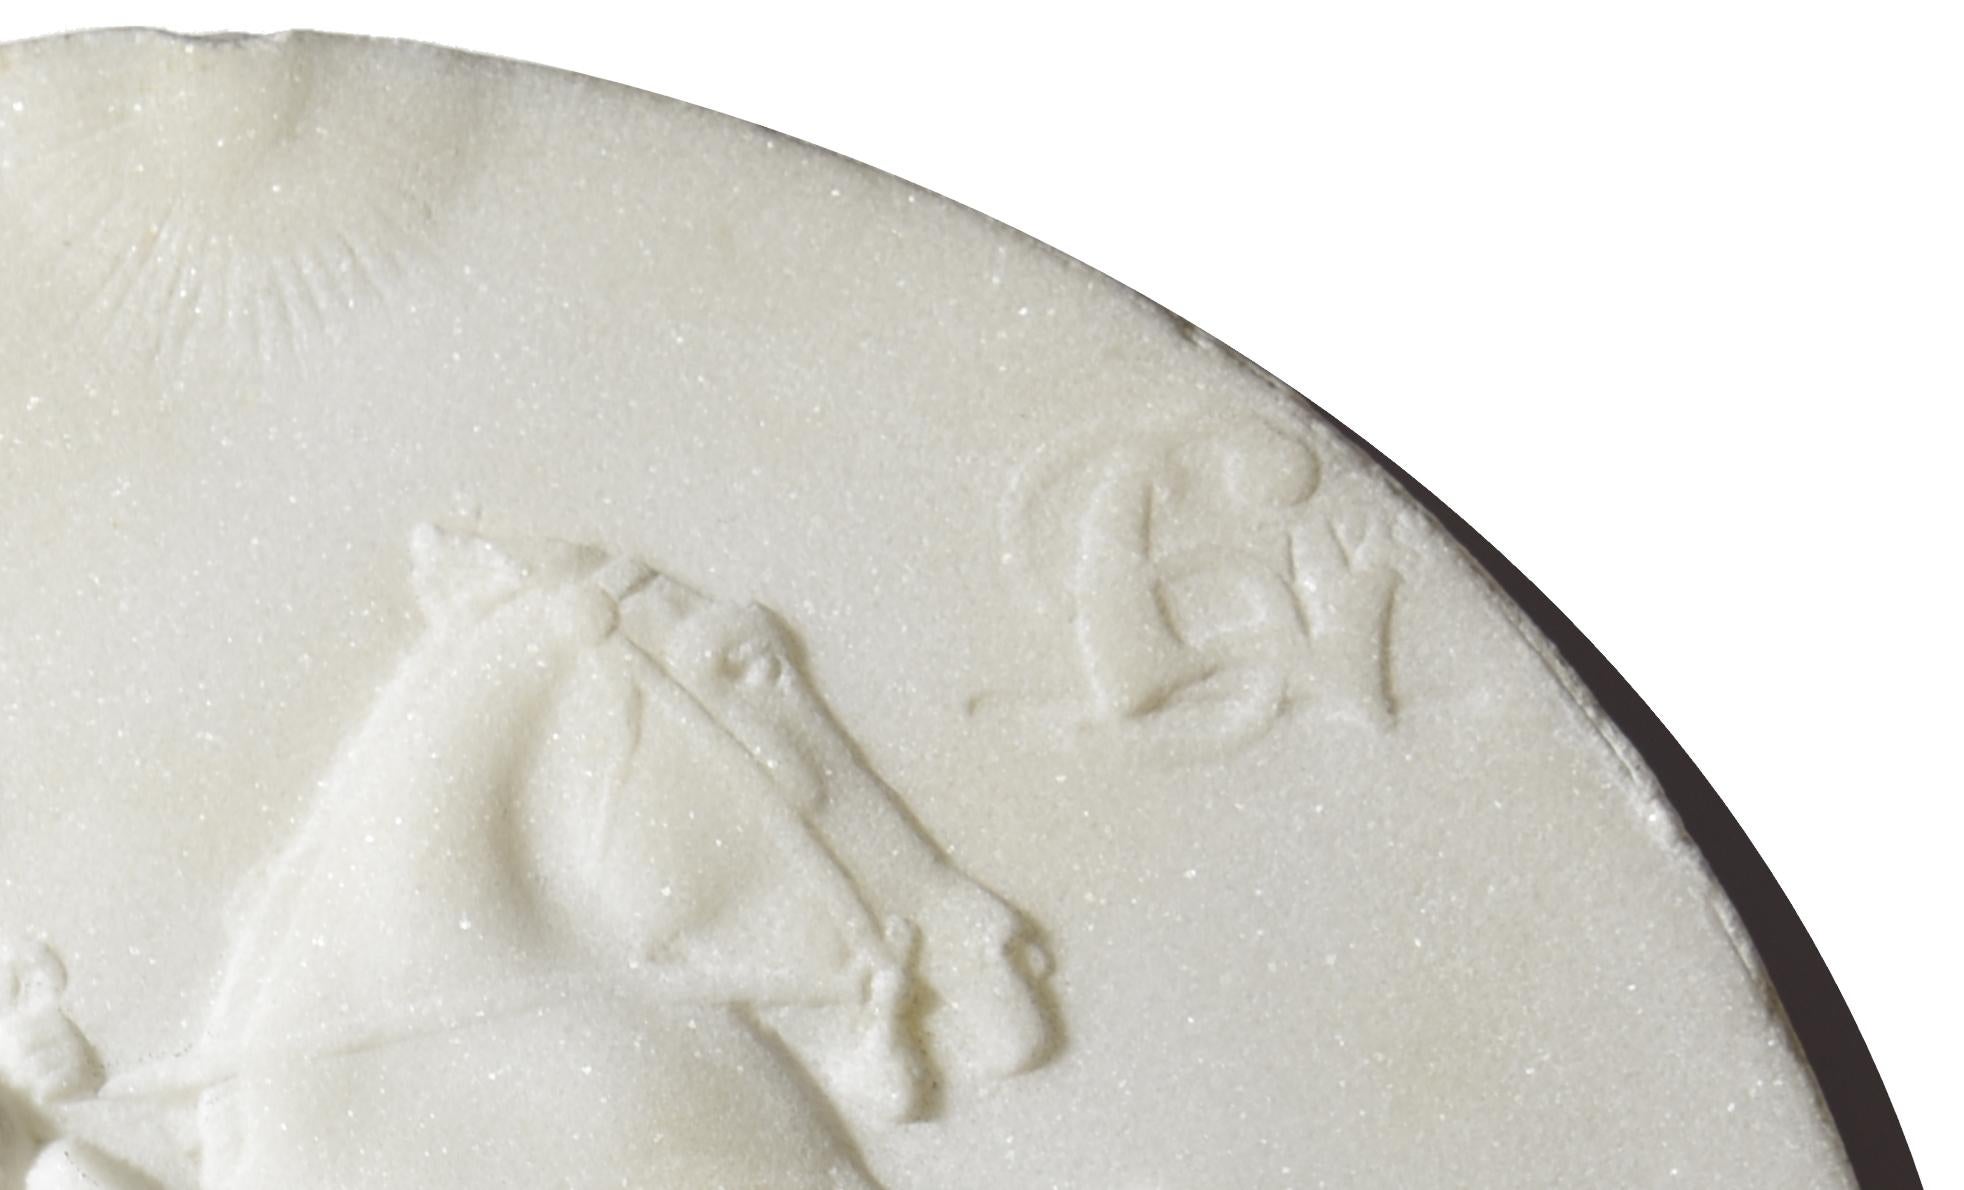 Emmanuel Frémiet (1824-1910) - marble medallion depicting St Georges slaying the dragon

Carved in crystalline white marble, bearing the figure of St Georges and the signature FREMIET, this tondo presents the profile in low relief of the famous